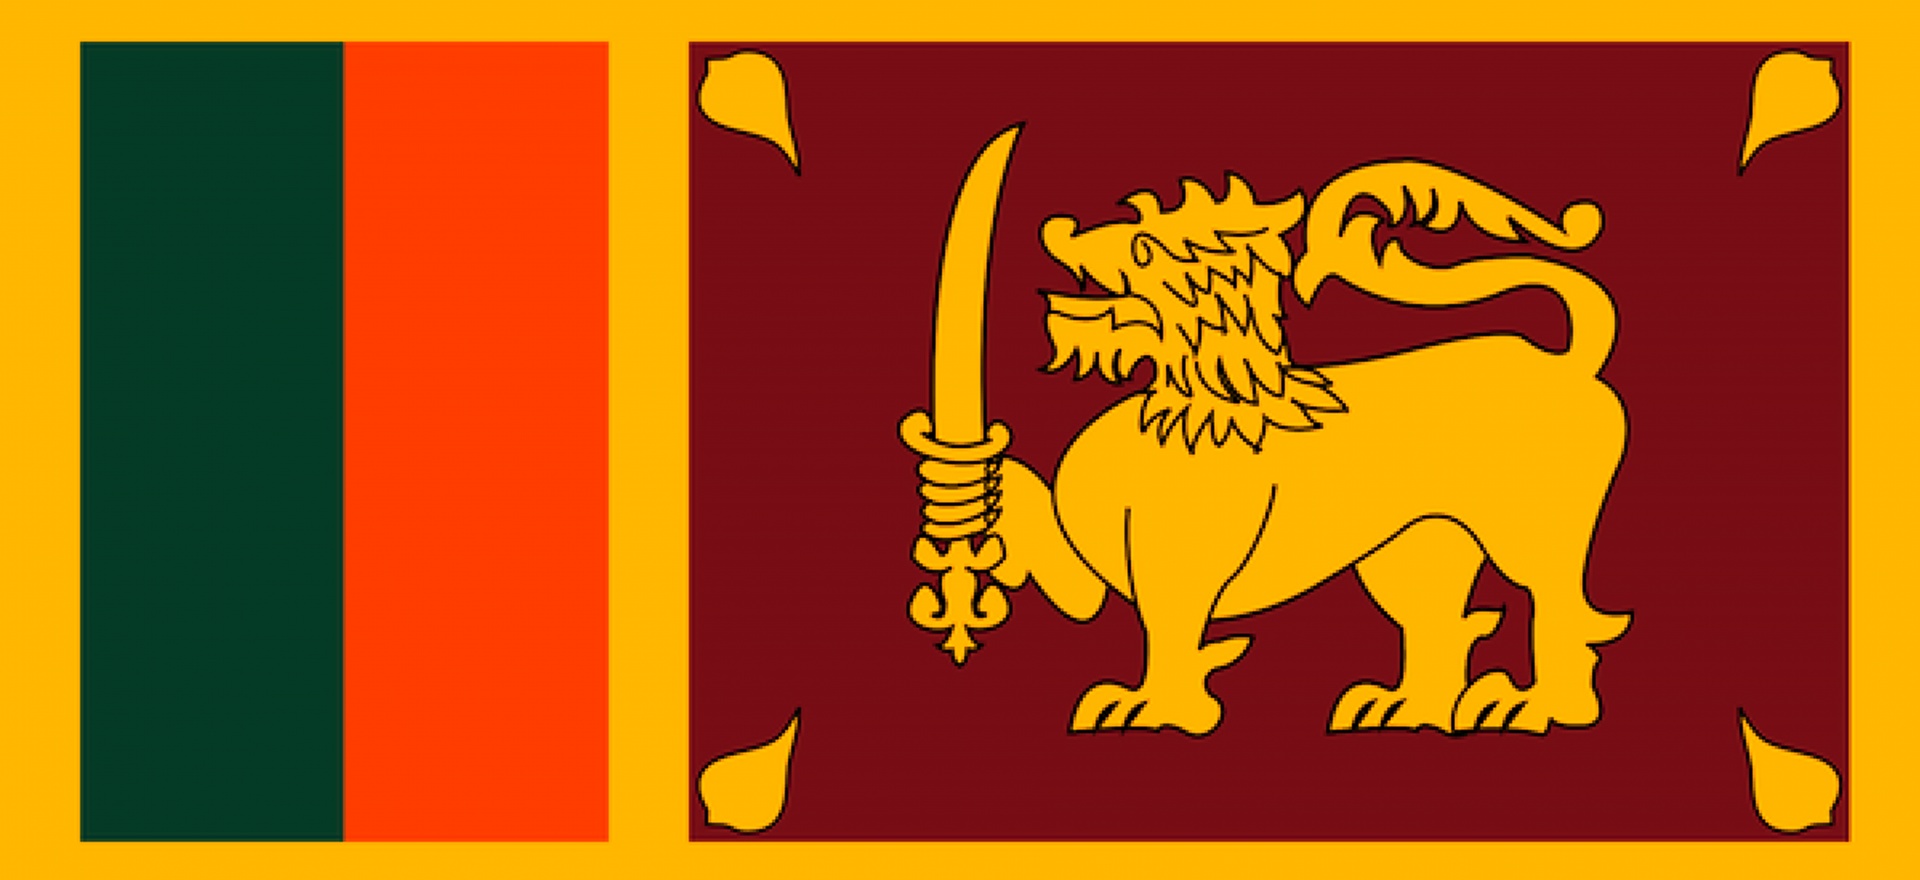 The flag of Sri Lanka, also called the Lion Flag or Sinha Flag, consists of a gold lion holding a kastane sword in its right fore-paw in a maroon background with four gold bo leaves in each corner.